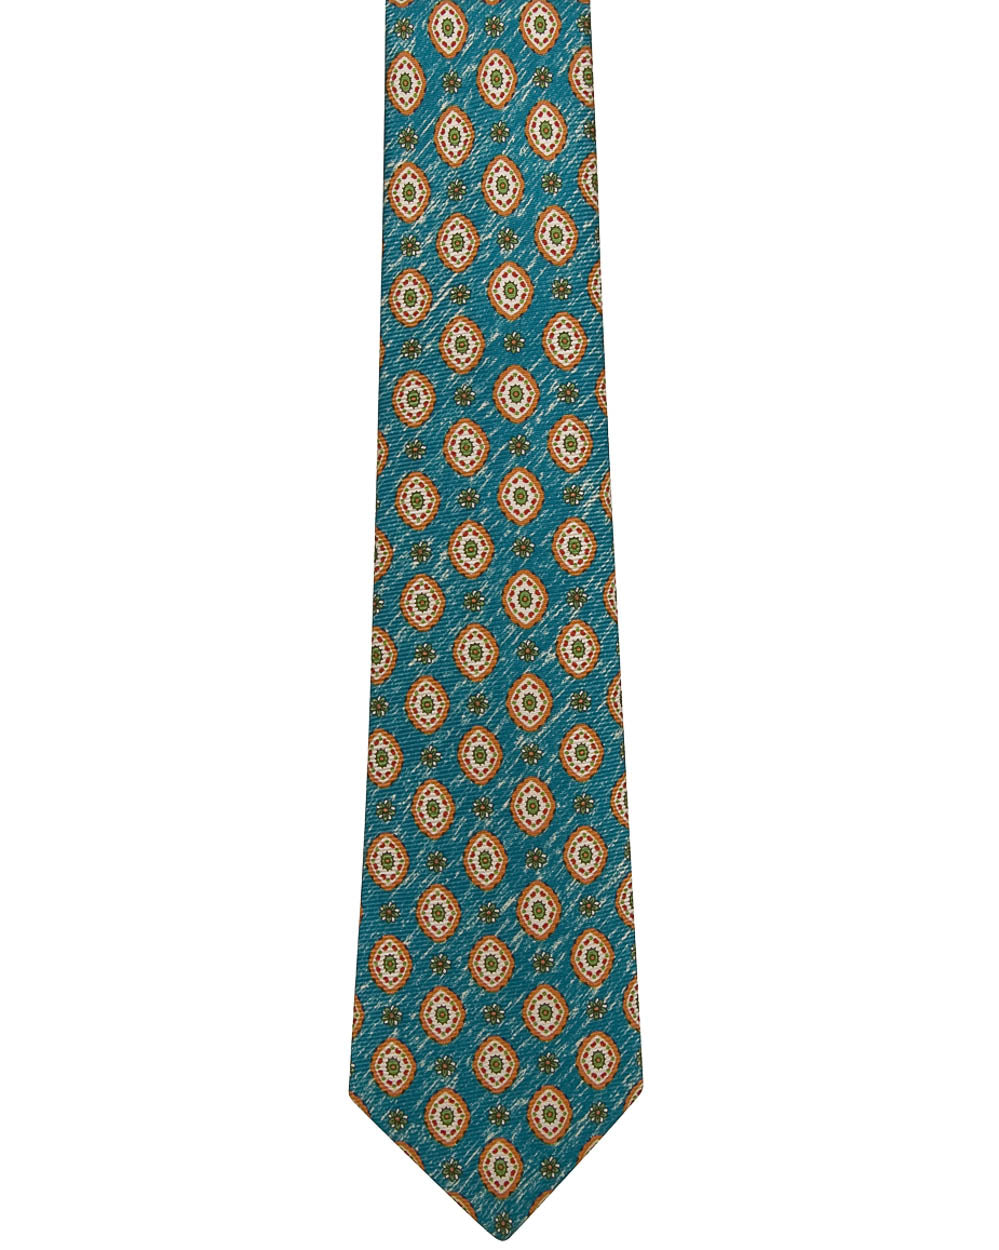 Teal with Orange and Green Medallion Tie